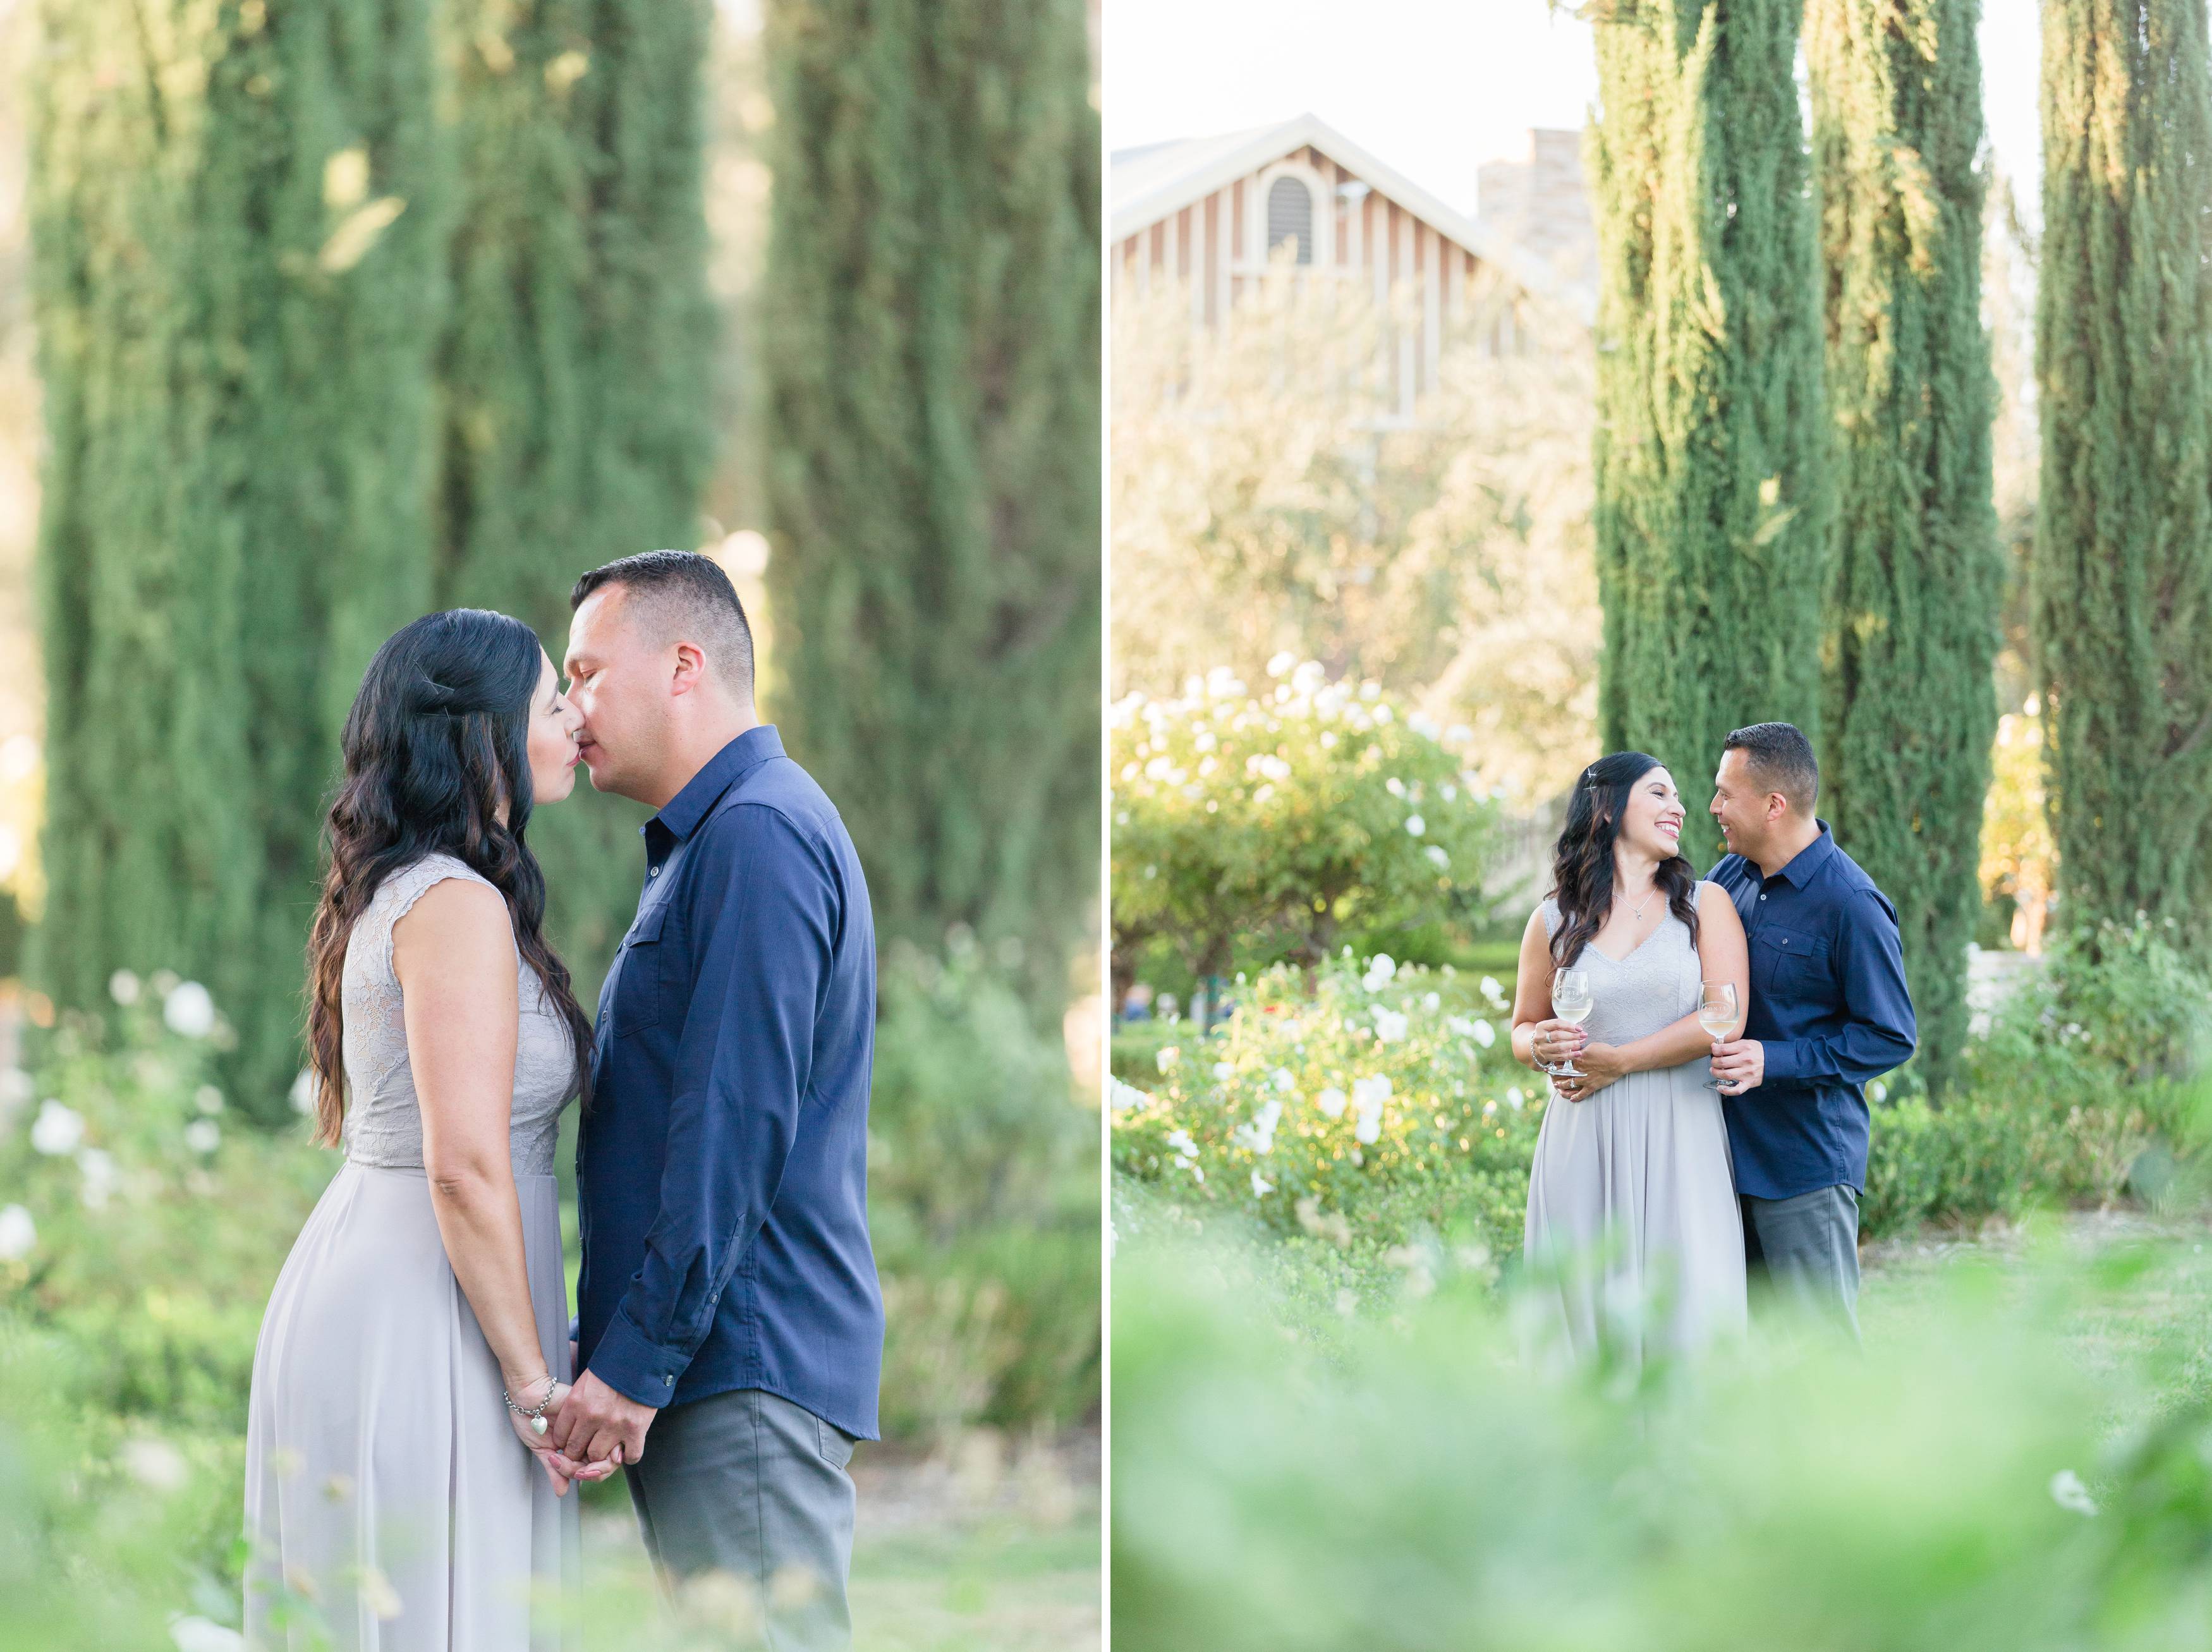 beautiful couple kissing in garden Ponte Winery Temecula California wedding engagement maternity photography Carrie McGuire photographer California